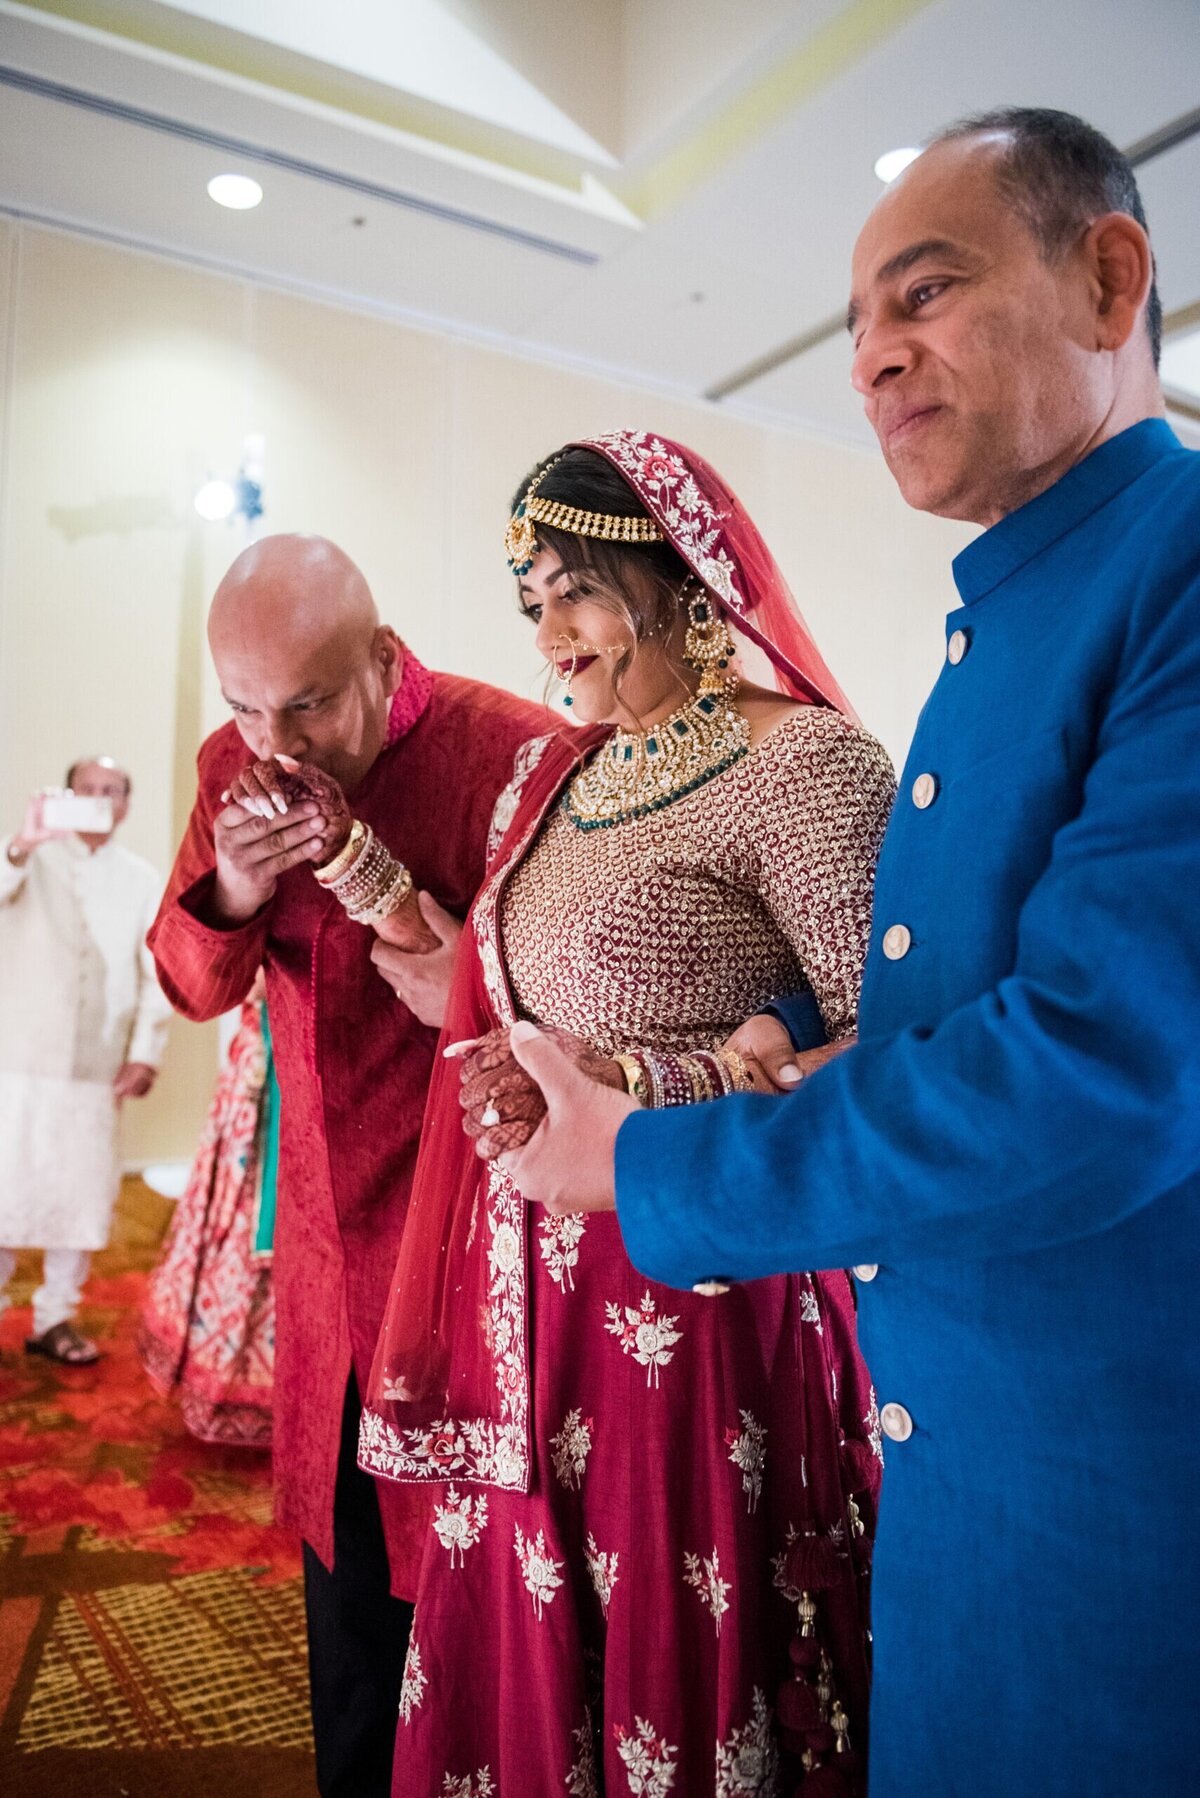 An Indian bride and her two father figures stand with her at the end of the aisle. One of the men kisses her on the hand.